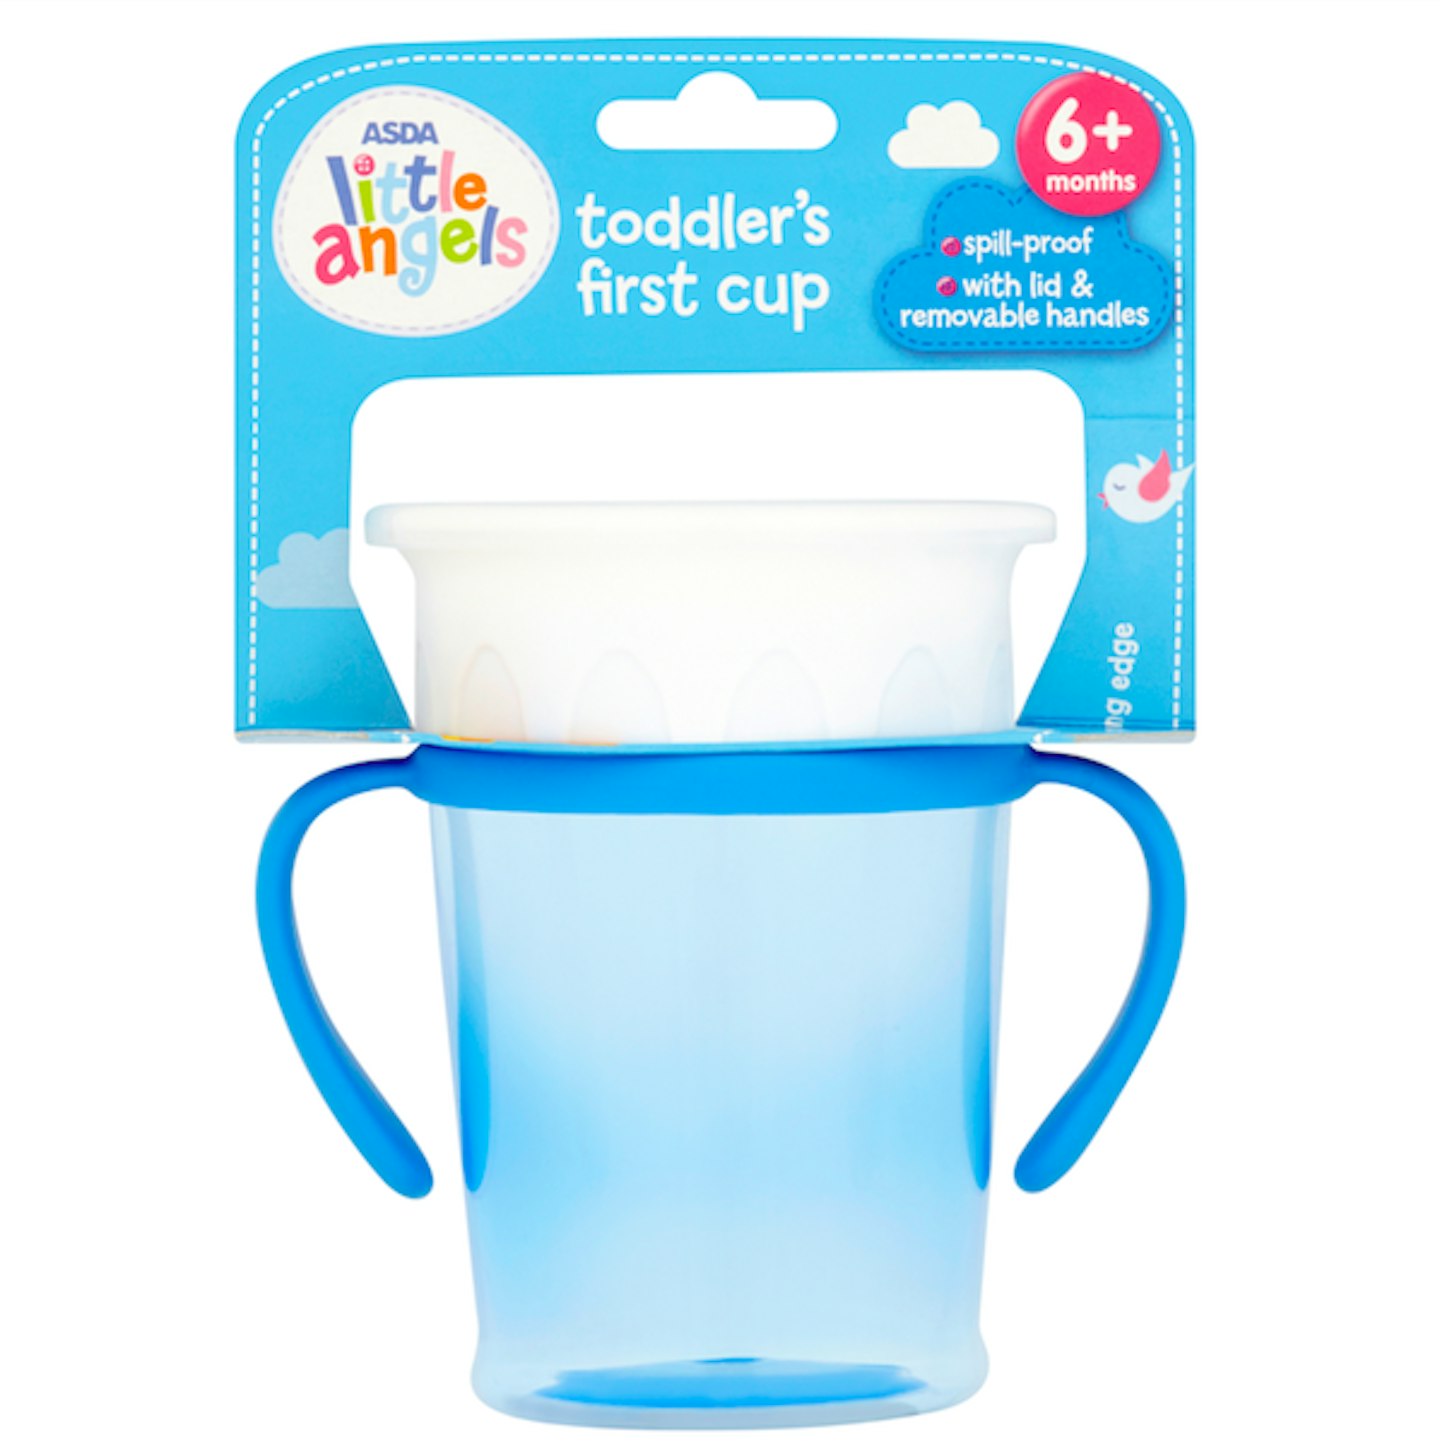 https://images.bauerhosting.com/affiliates/sites/12/motherandbaby/legacy/root/asda-sippy-cup.png?auto=format&w=1440&q=80